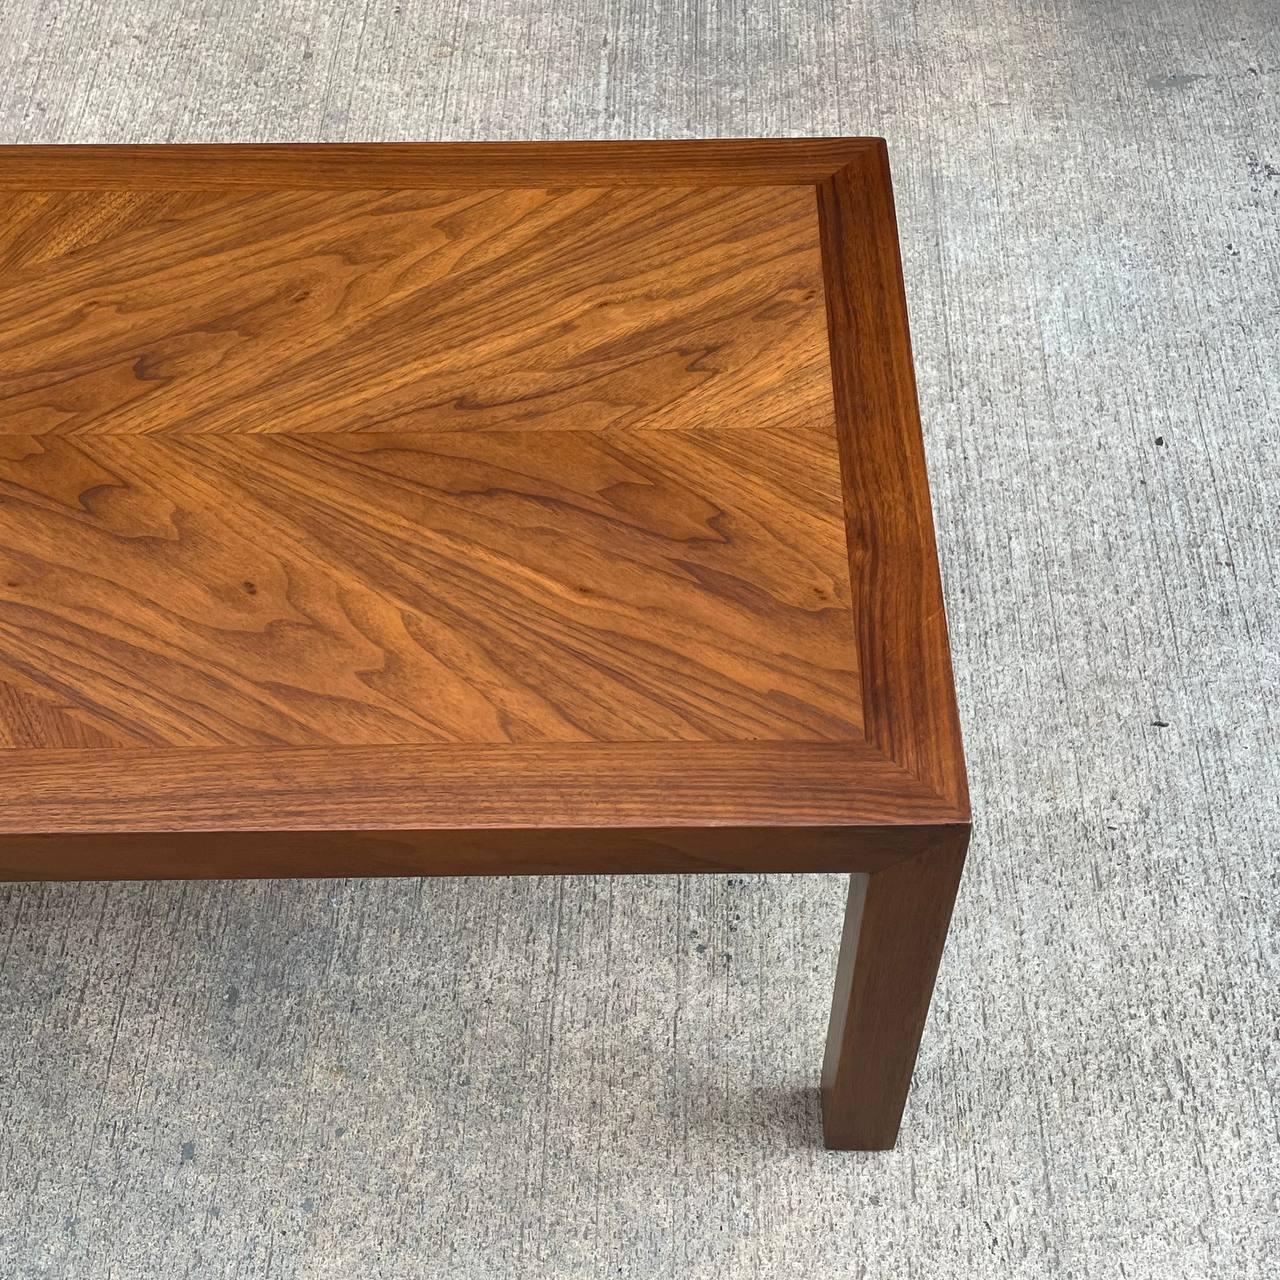 Newly Refinished - Mid-Century Modern Walnut Coffee Table by Lane For Sale 2